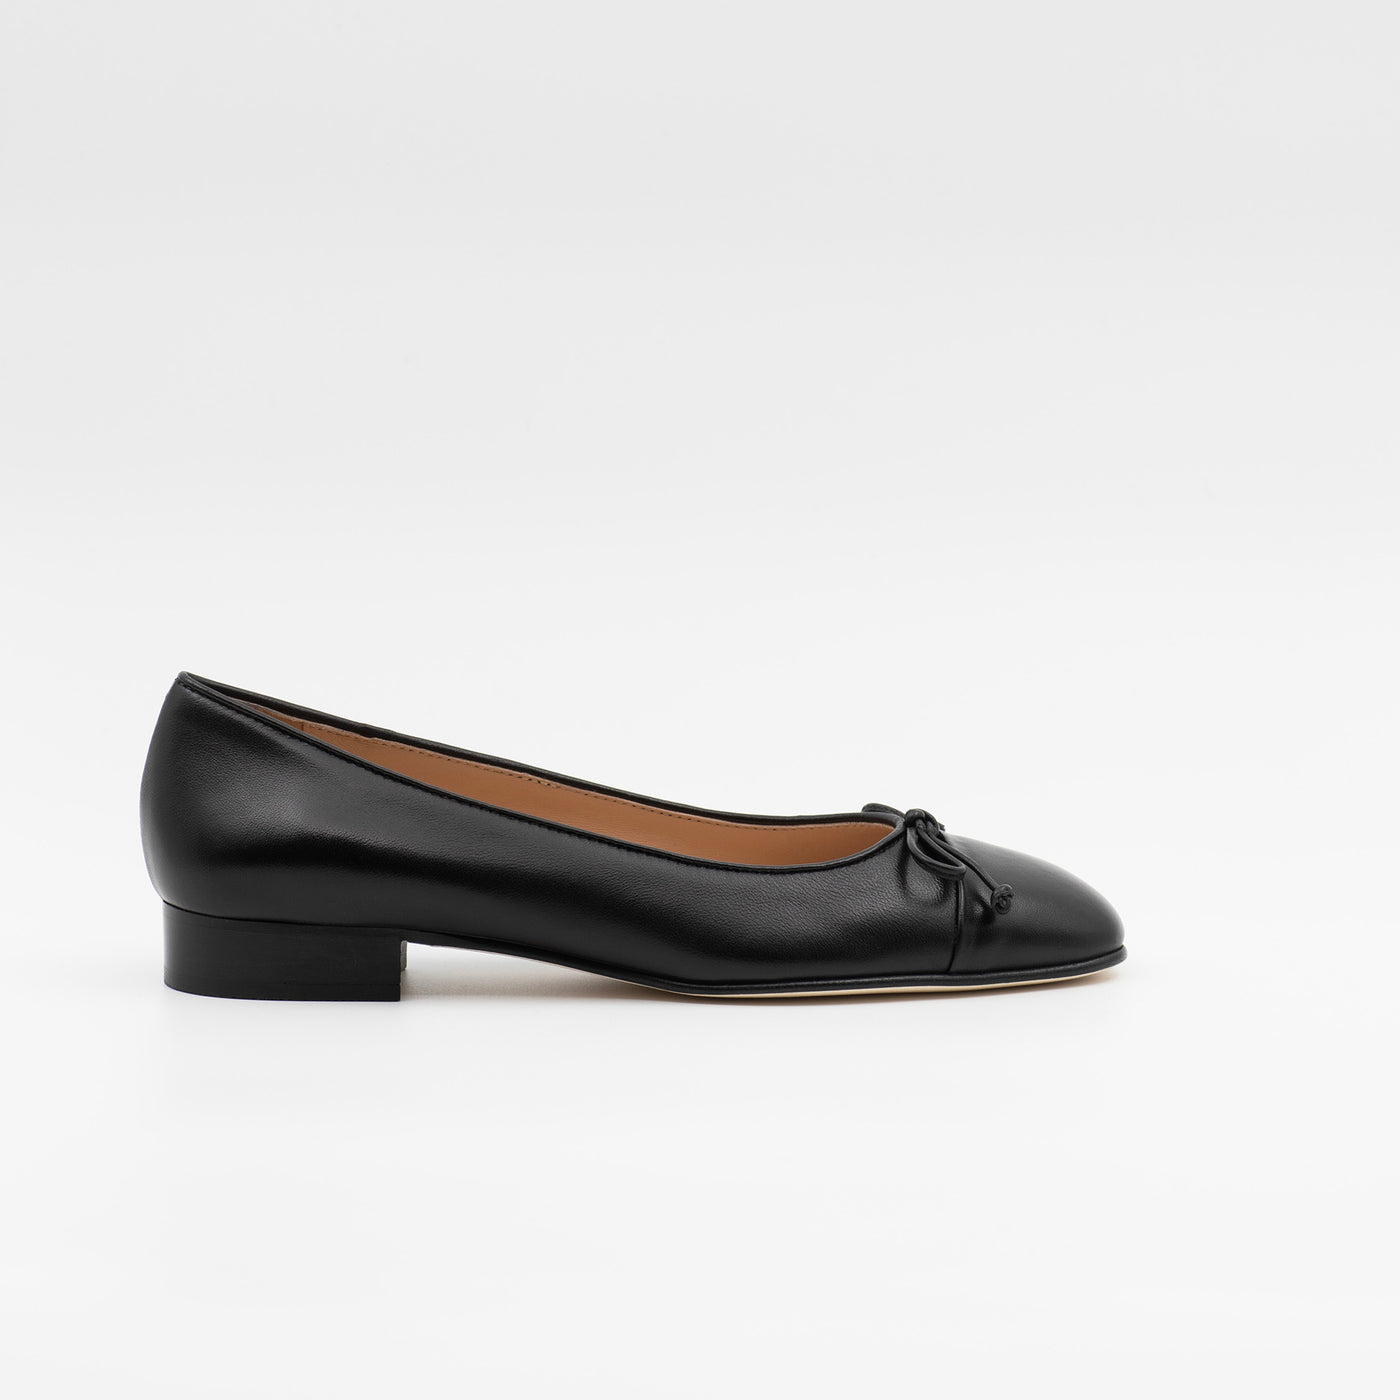 Two-toned Ballet flat in Black